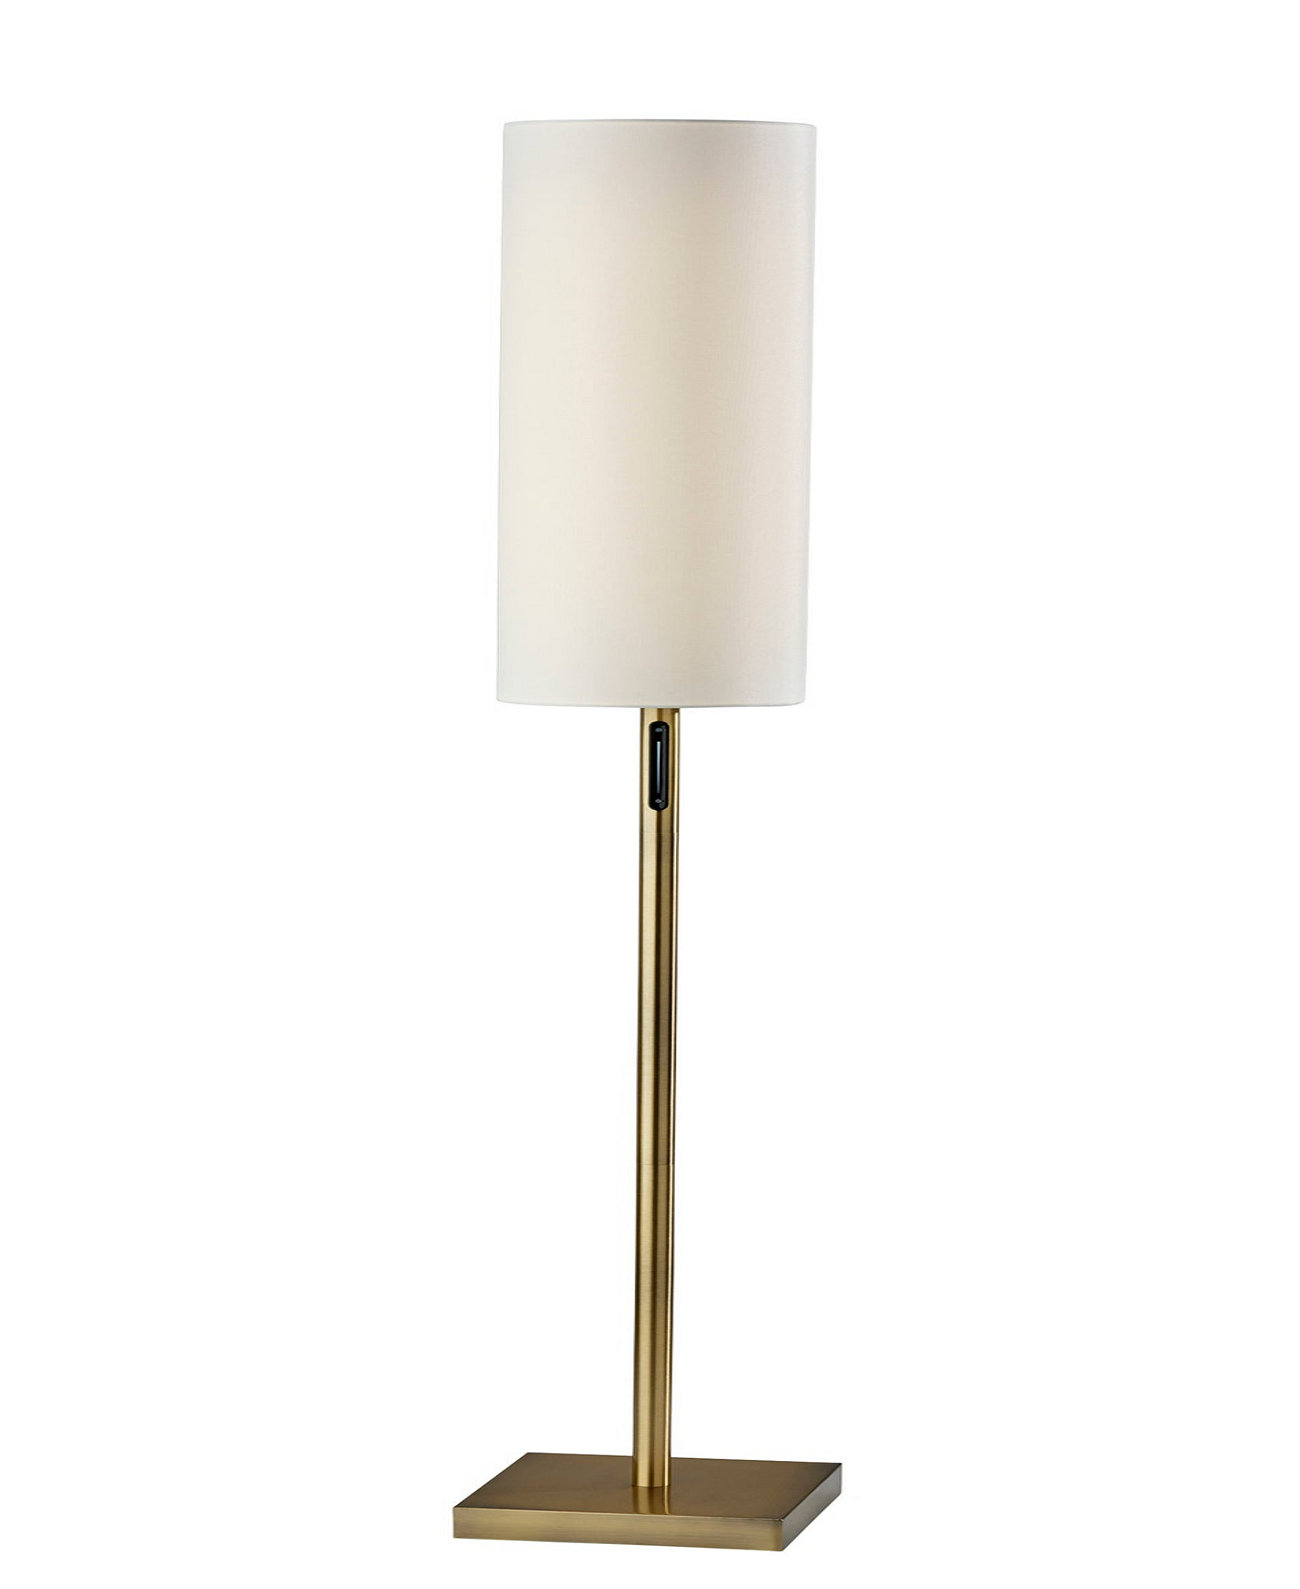 62" Matilda LED Floor Lamp with Smart Switch Adesso